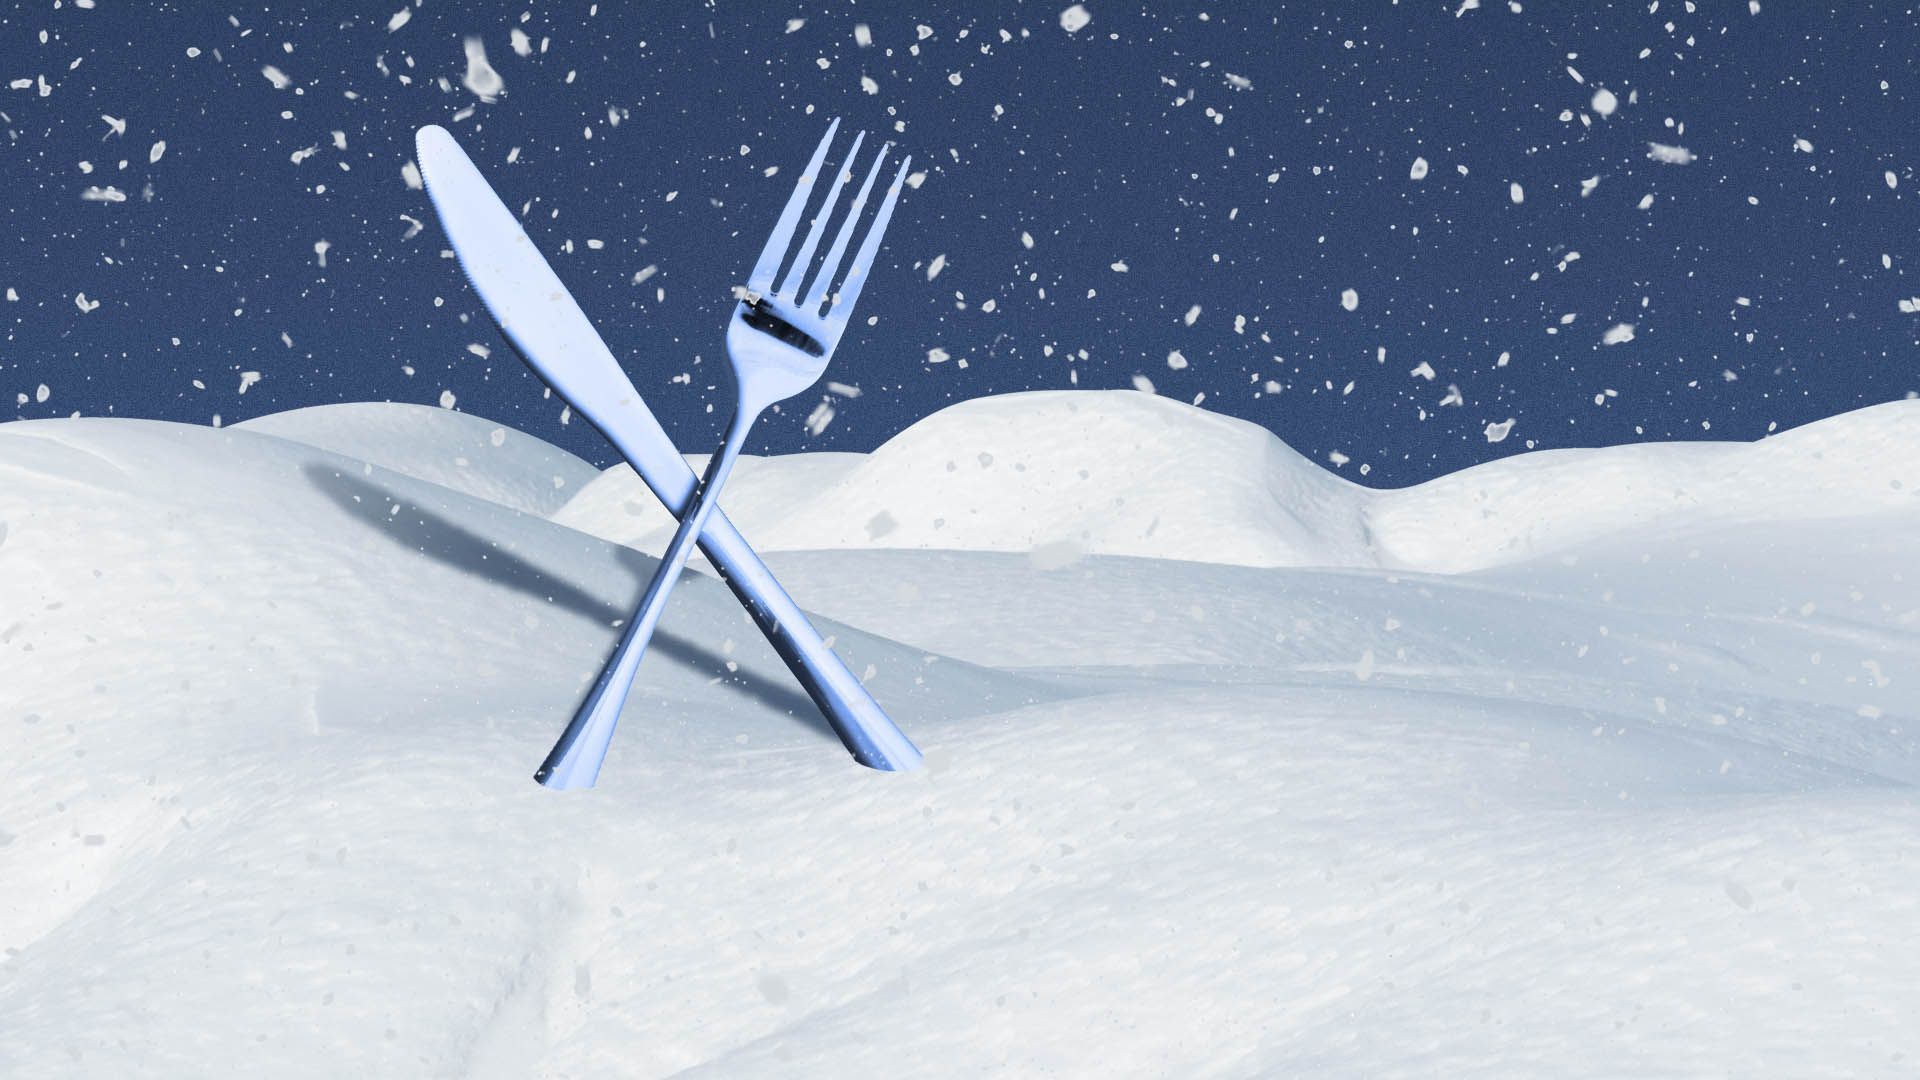 Illustration of a knife and fork buried in snow